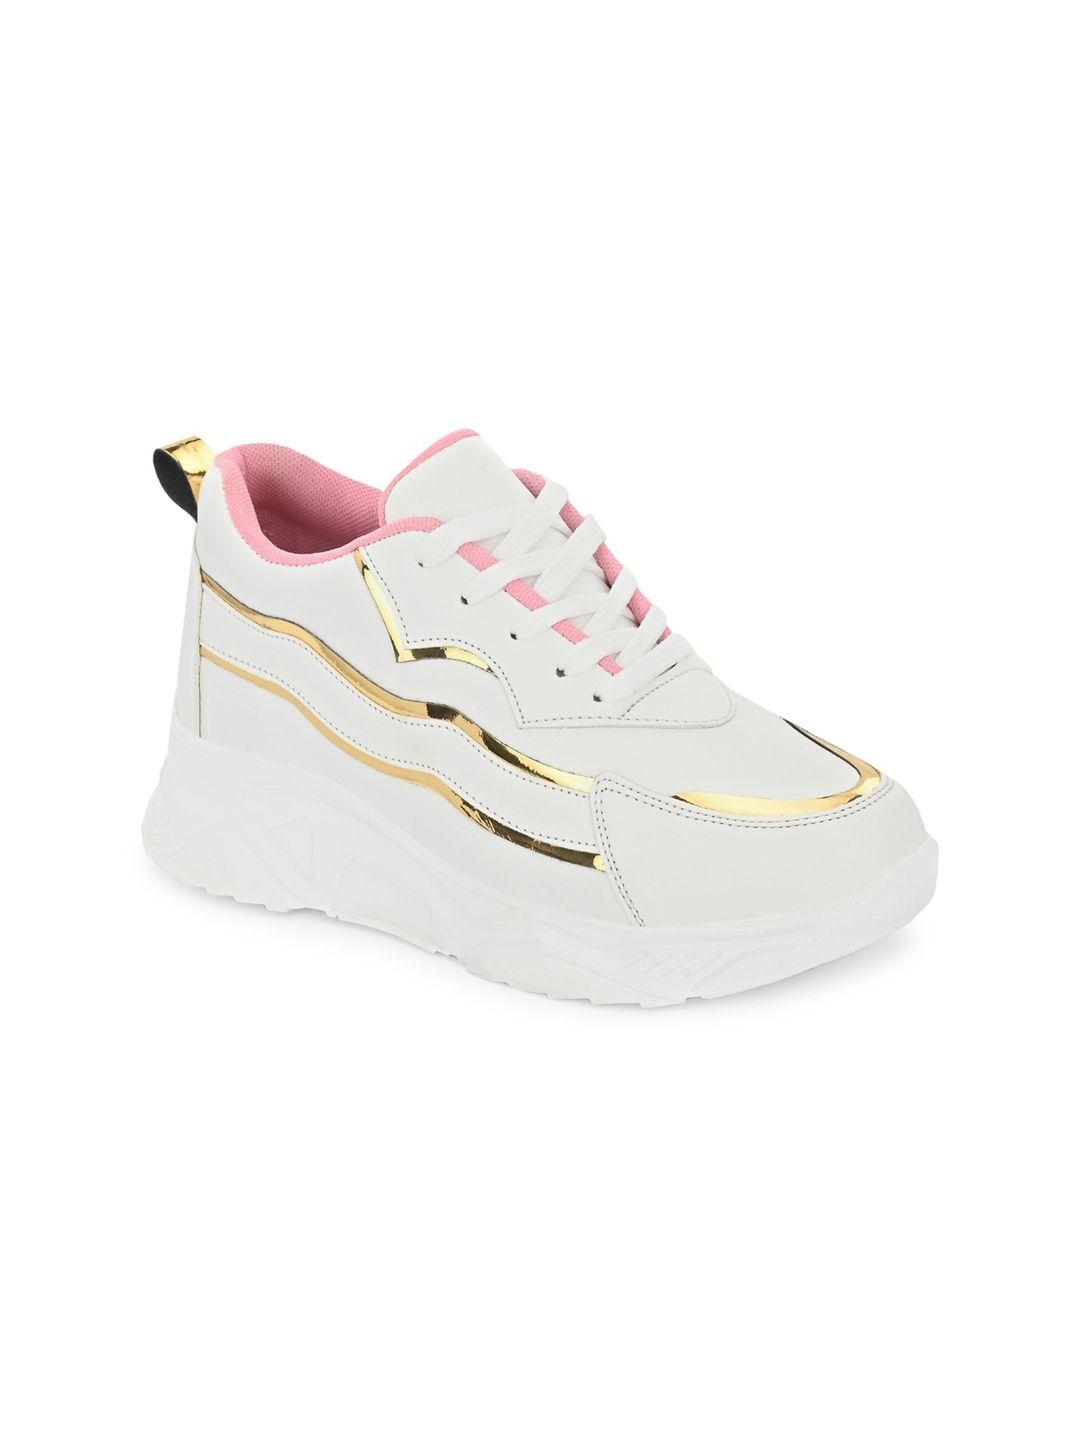 dressberry-women-white-and-gold-toned-lightweight-sneakers